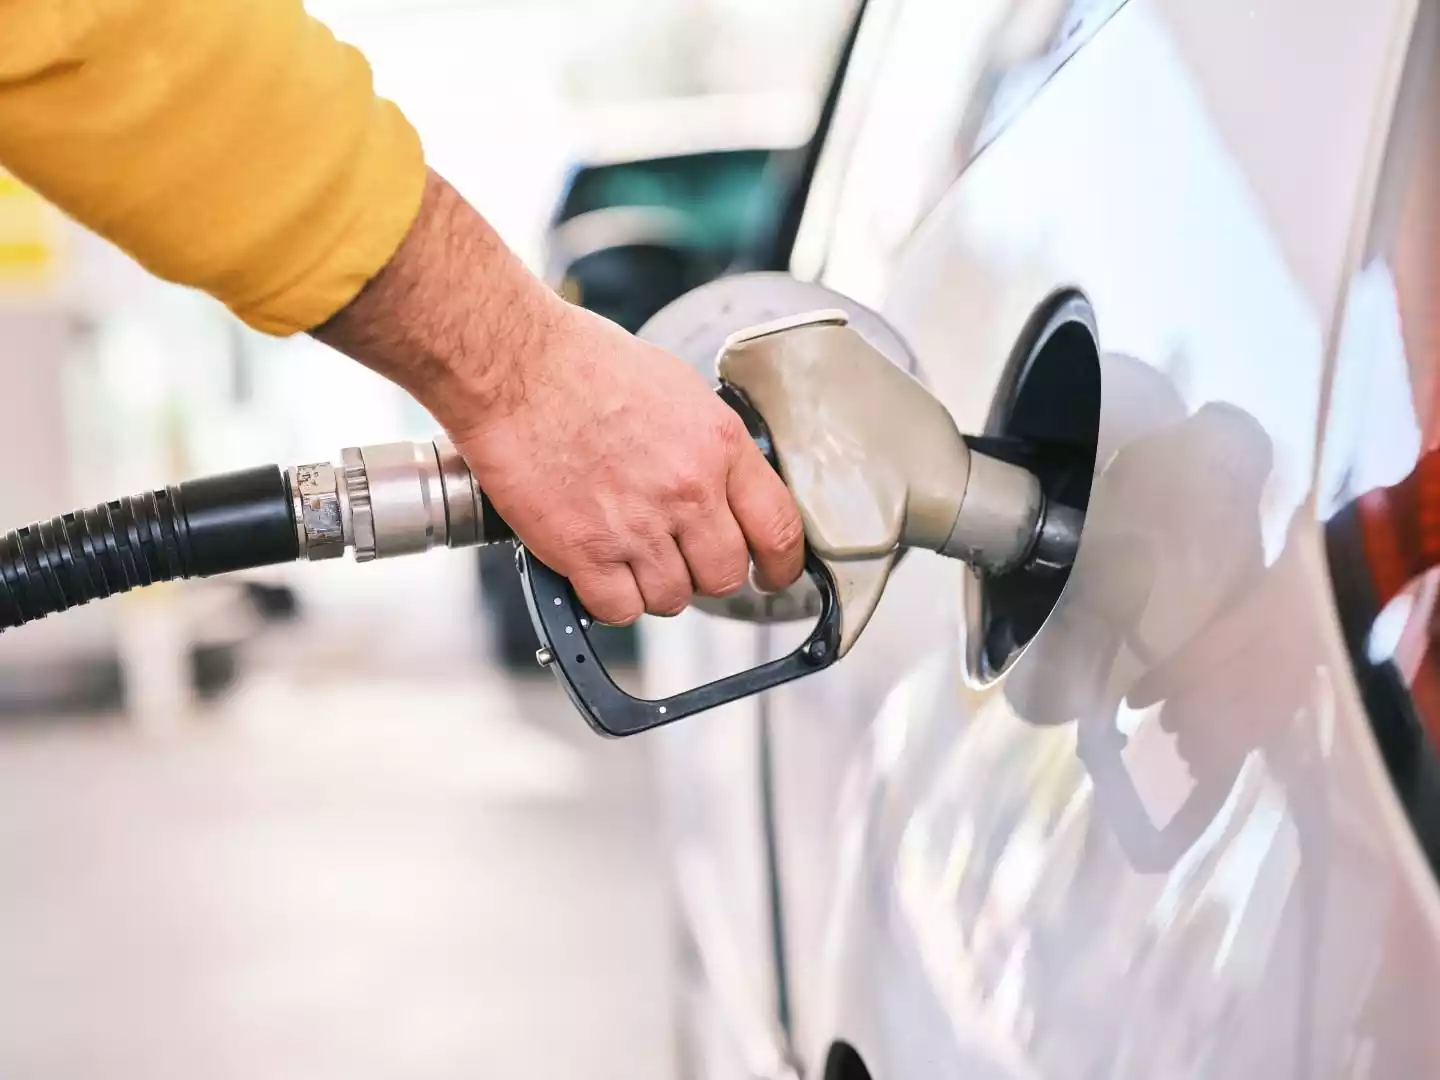 What Is Top Tier Gas? - CARFAX